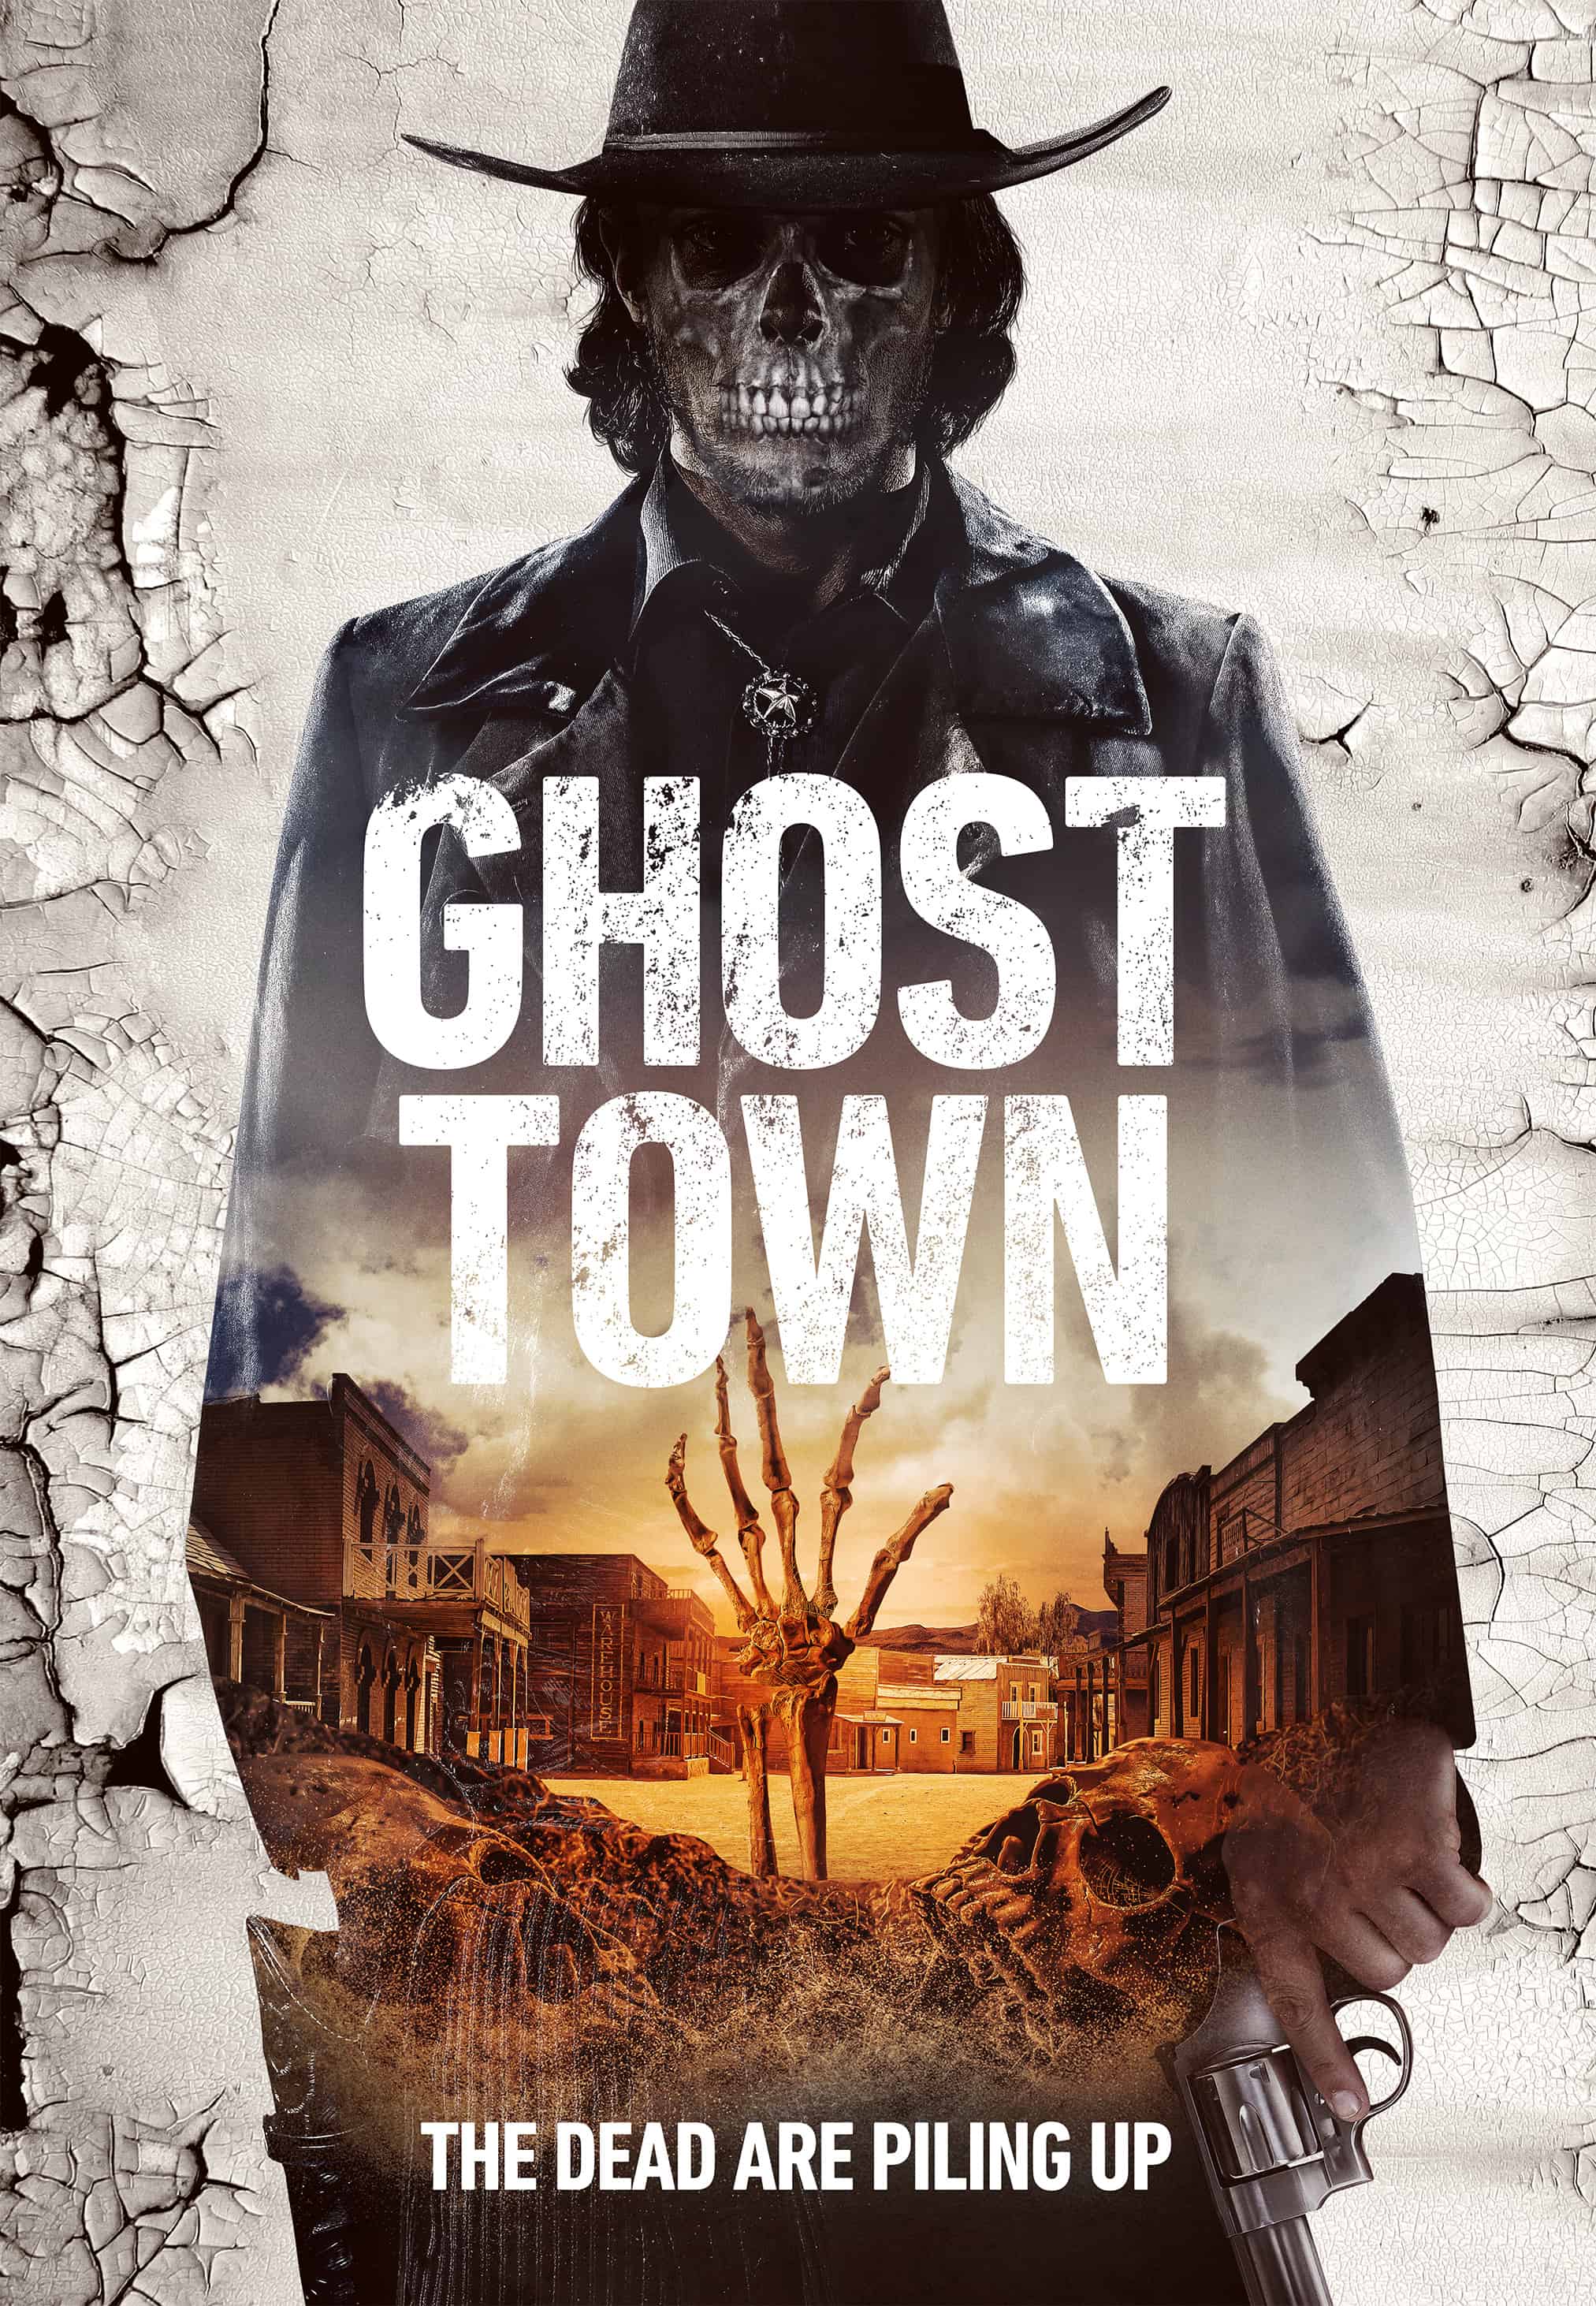 Ghost Town offers up a poster and trailer arrives March 7th 27